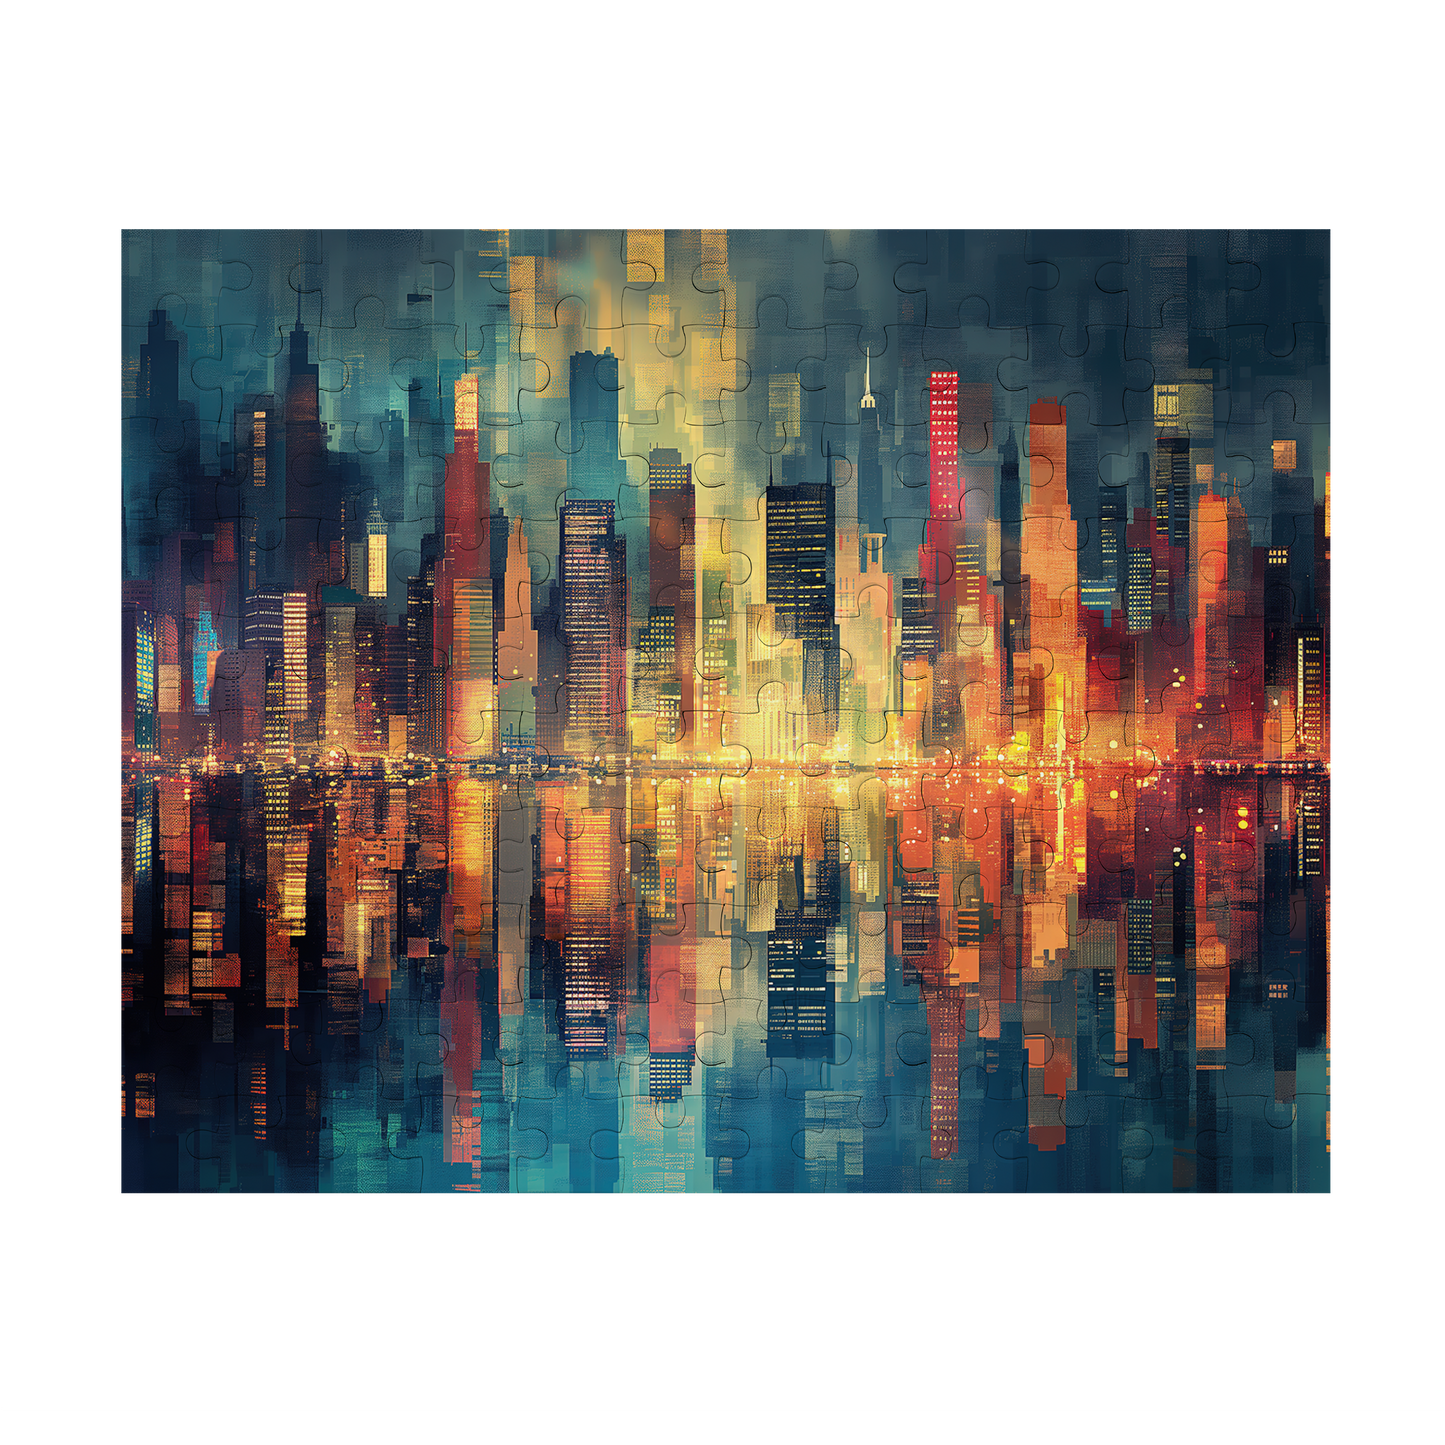 Reflections - Premium Jigsaw Puzzle - Dynamic, Cityscape, Skyscrapers, Waterfront - Multiple Sizes Available